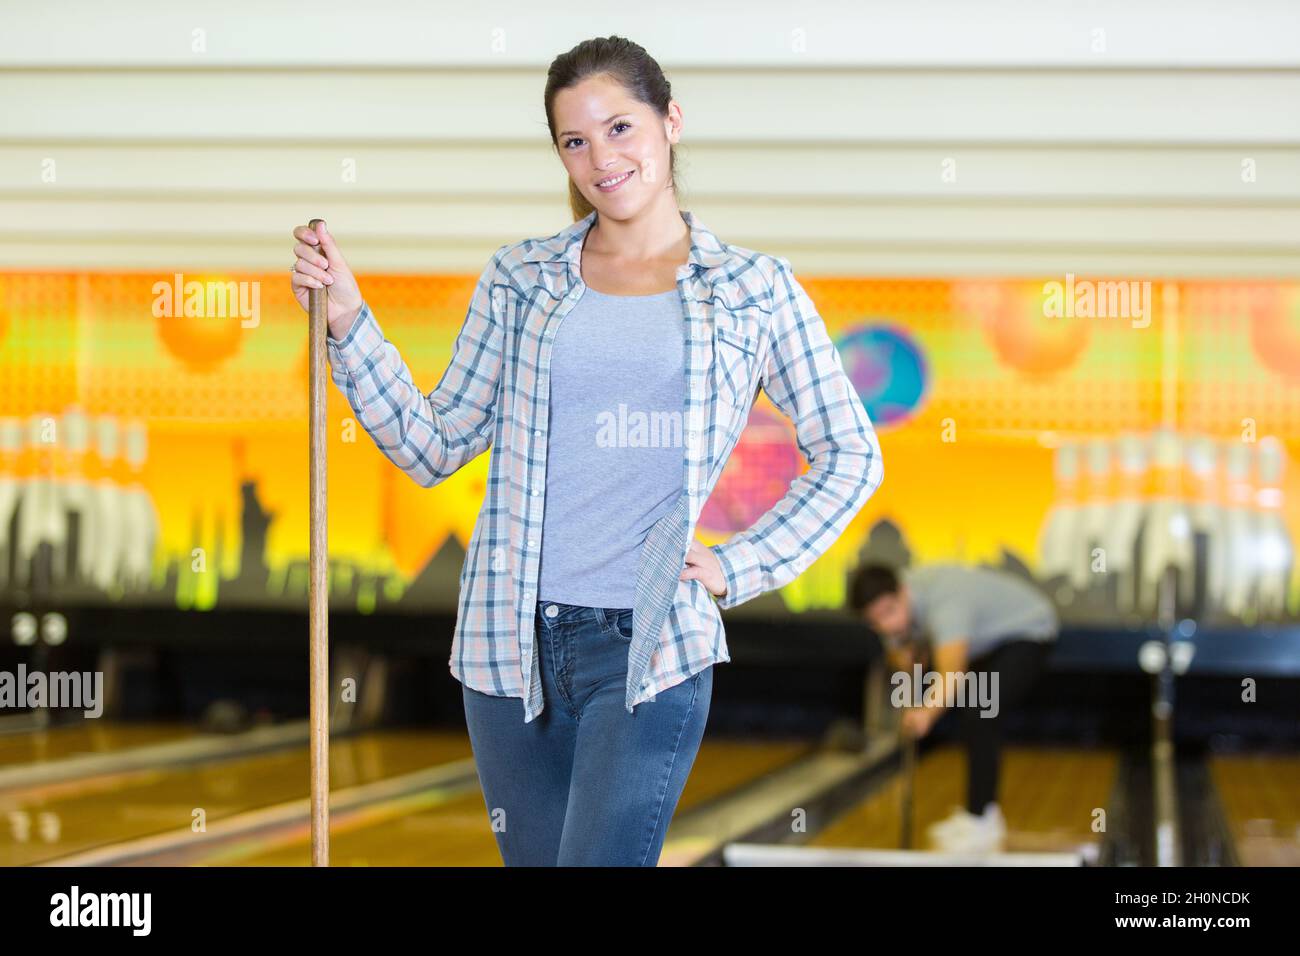 woman cleaning a bowling center Stock Photo